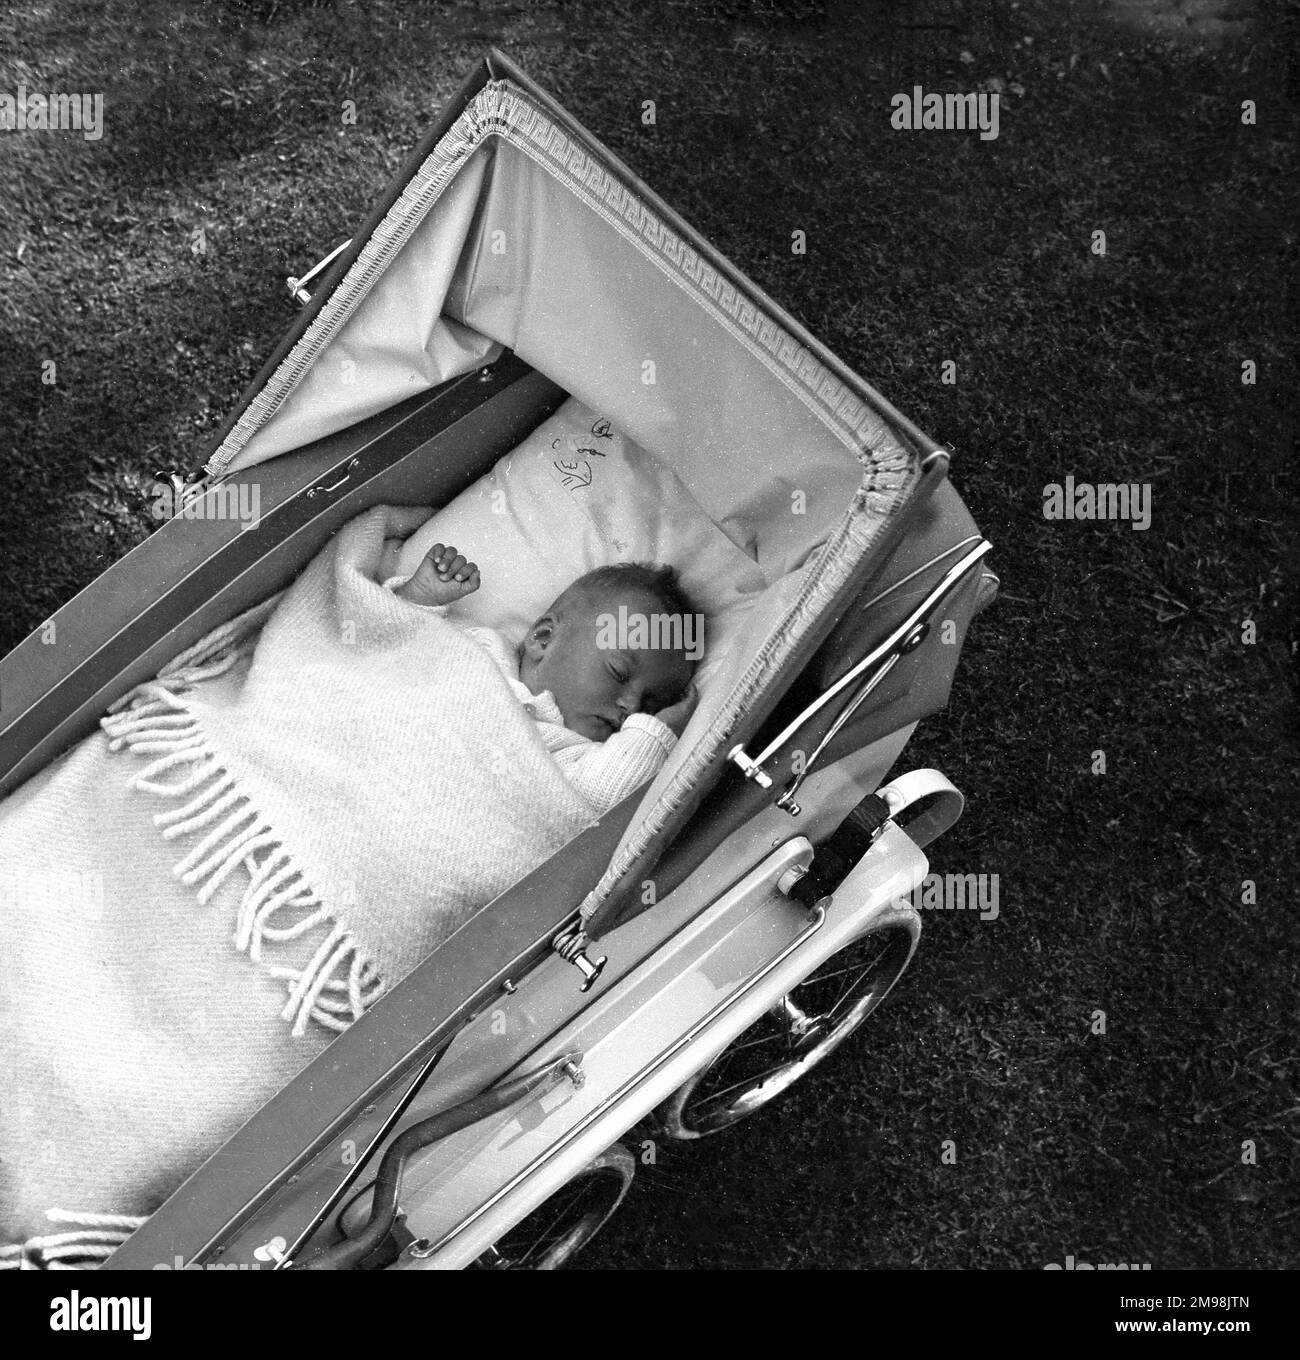 1950s, historical, view from above of a baby lying on its back, asleep, under a blanket, in a traditional four-wheeled coach-built pram or baby carriage, England, UK. This type of baby transport provided a comfortable, enclosed space for the small child to rest and sleep in and they would be facing the parent when pushed, enabling eye contact and interaction when awake. Stock Photo